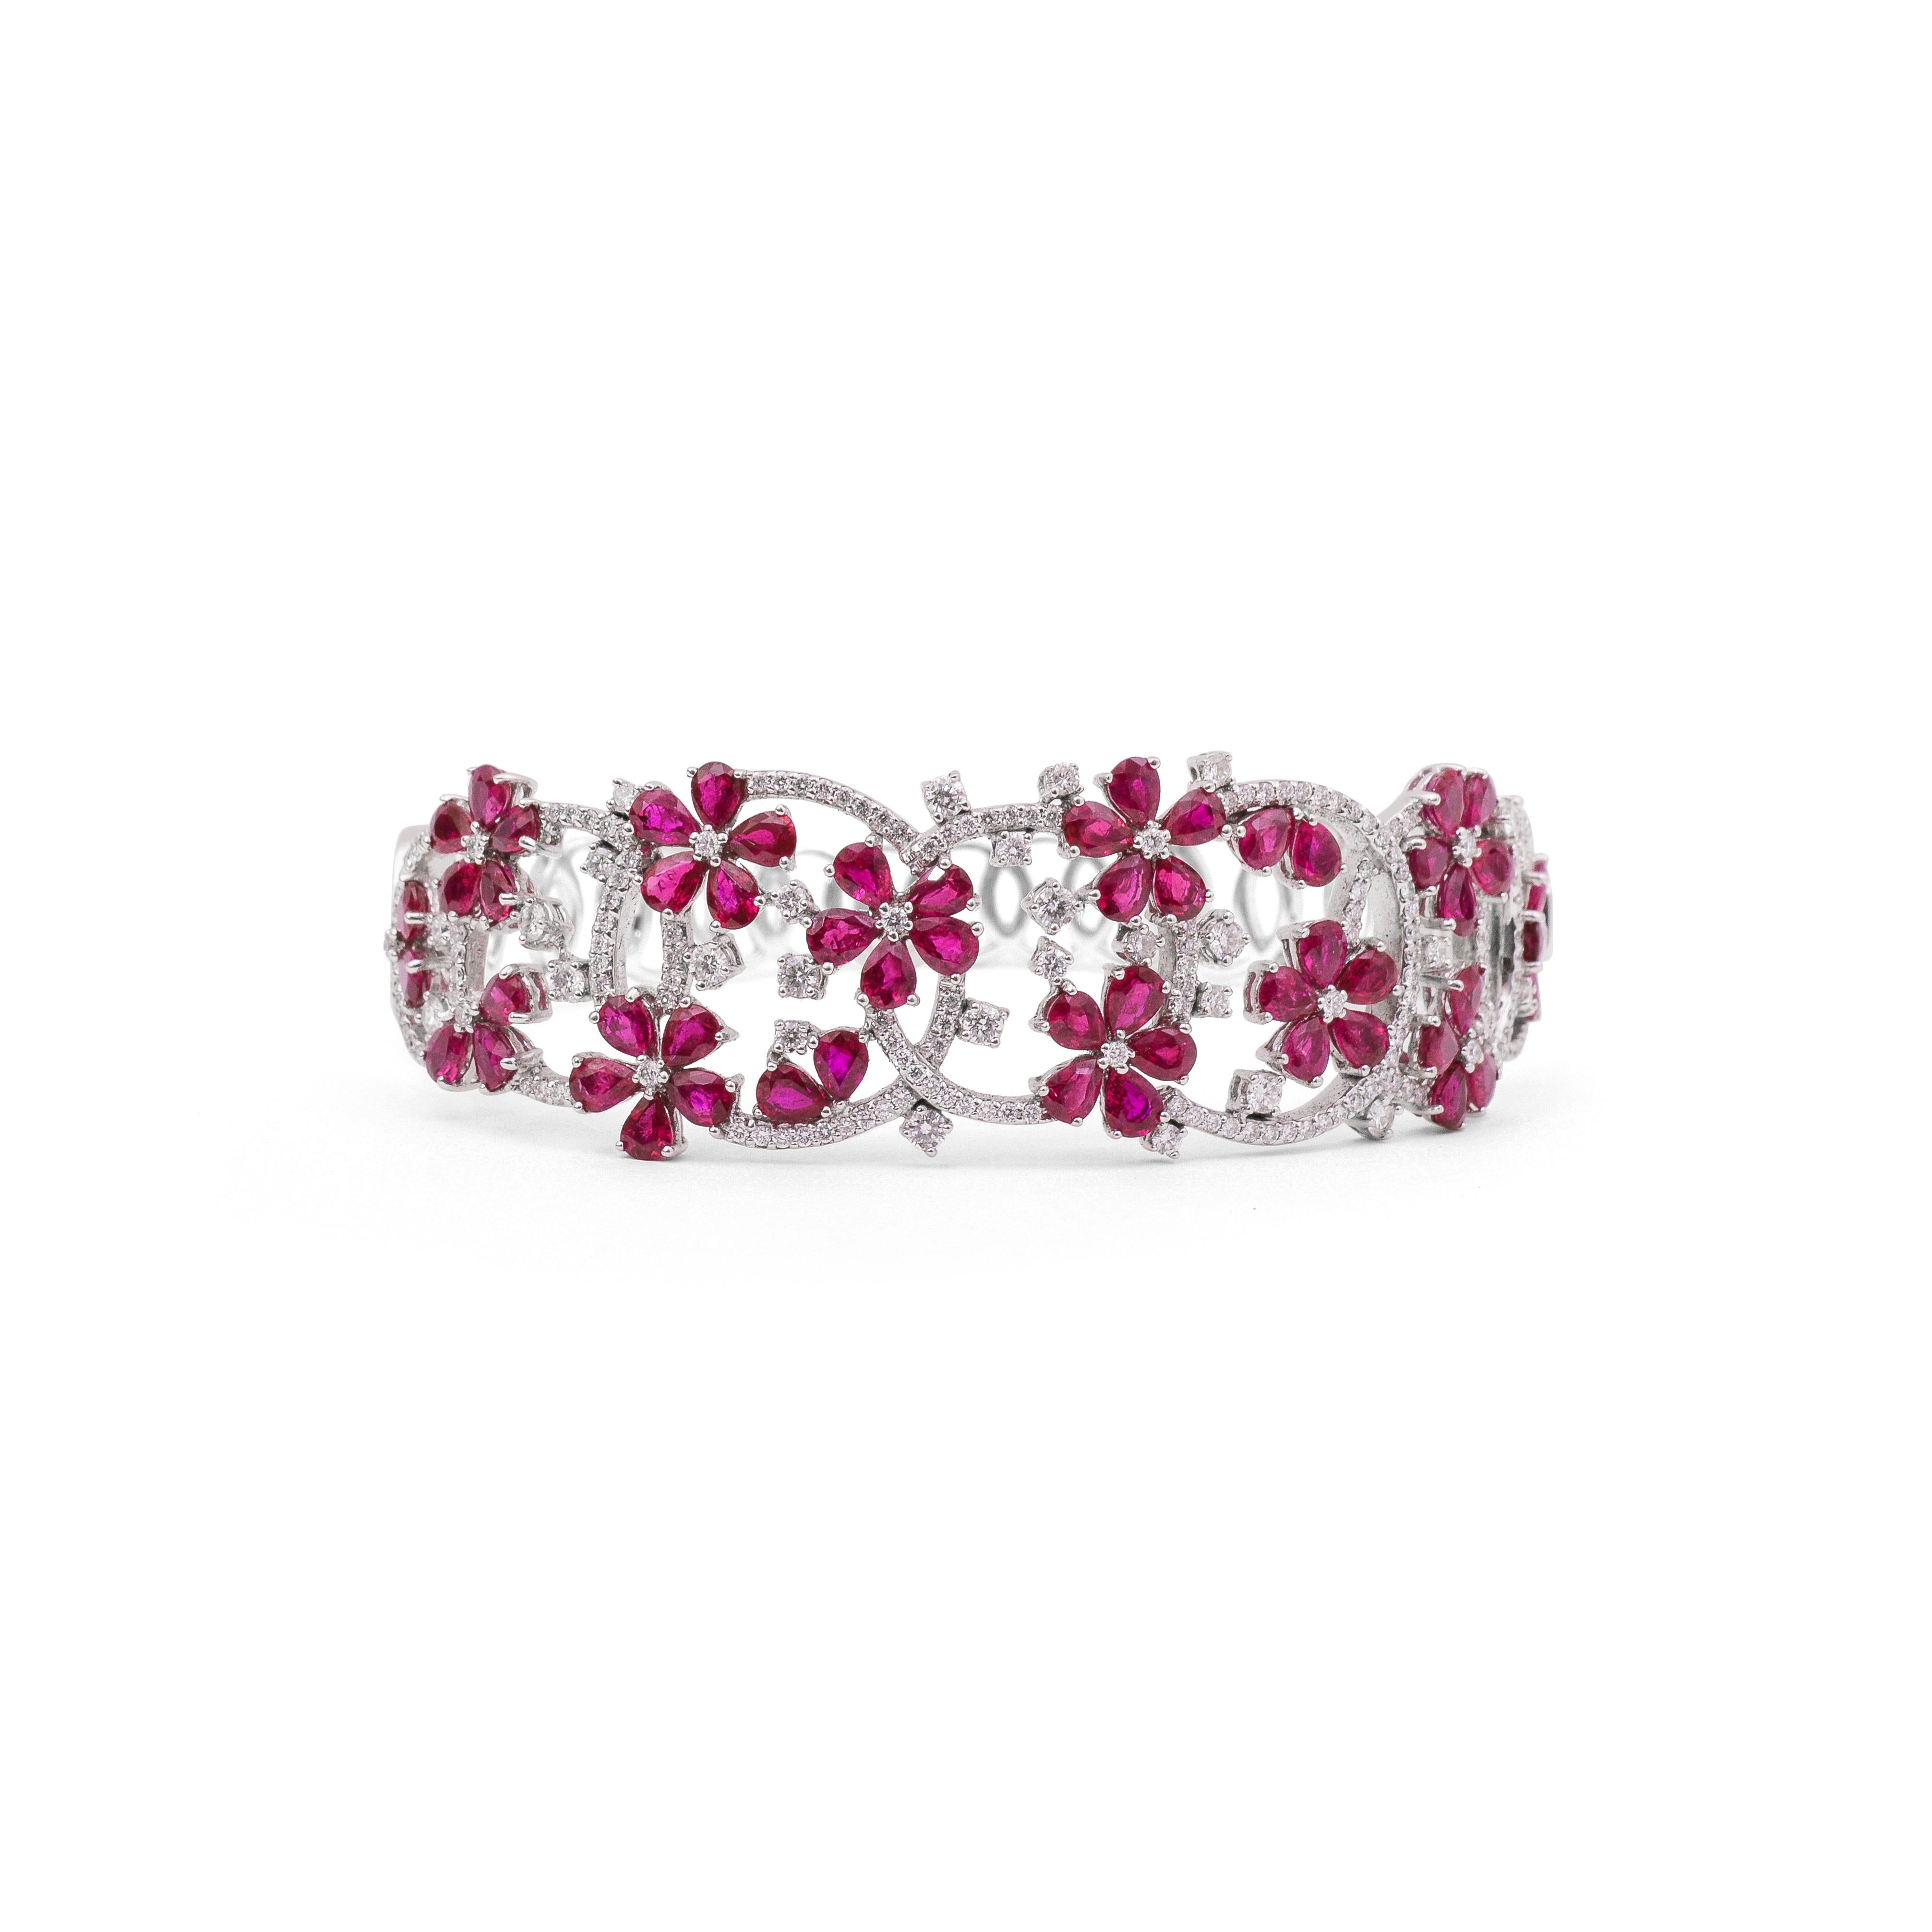 18 Karat White Gold Ruby Diamond Cuff Bracelet

This beautifully crafted 'FUN' cuff bracelet set in 18 Karat white gold studded with diamonds and rubies perfectly compliments your zest and passion for the good things in life.  Ideal for both day and